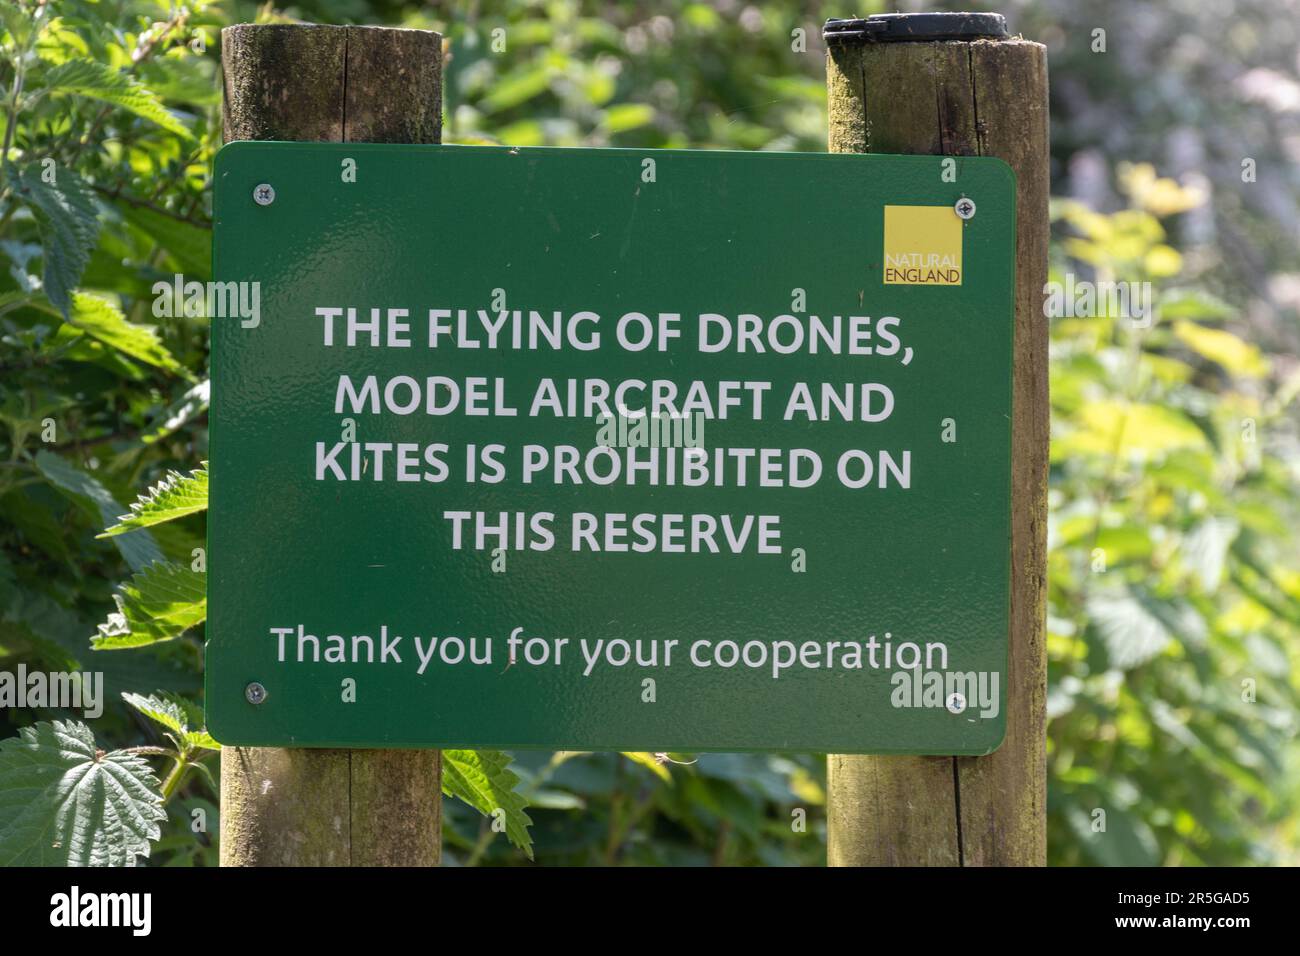 Sign on nature reserve - the flying of drones, model aircraft and kites is prohibited Stock Photo